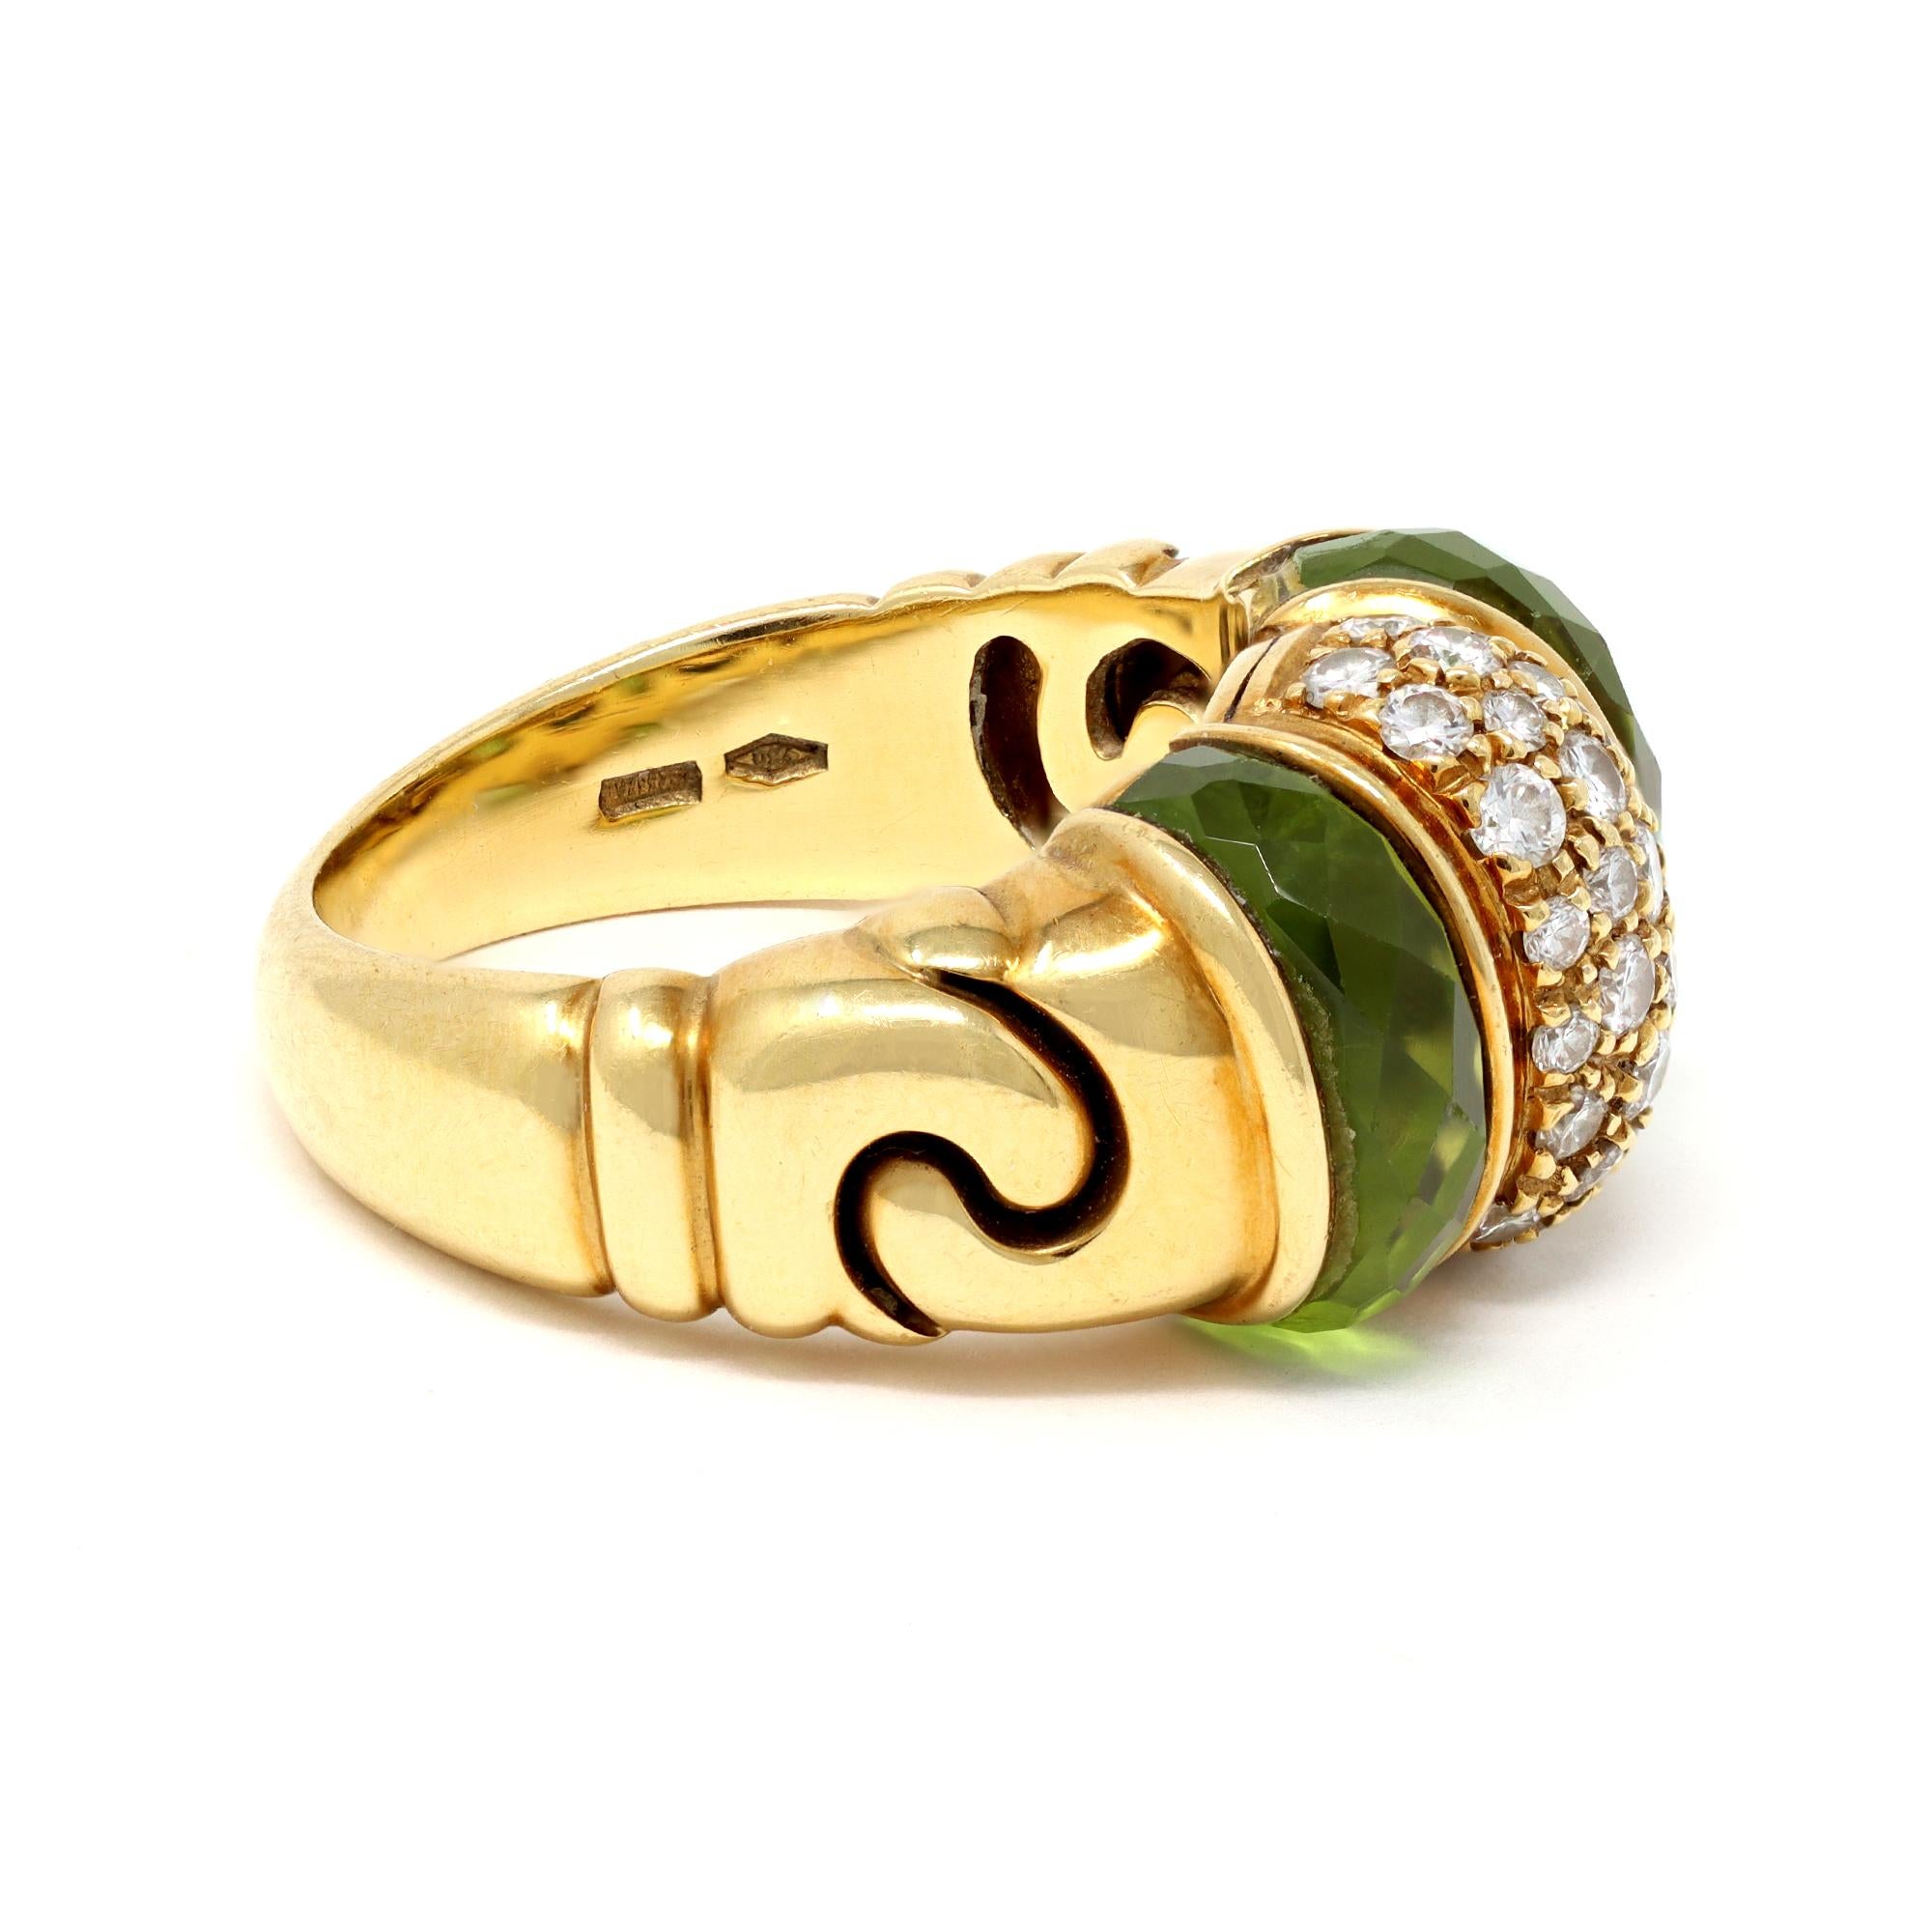 An iconic design from the Italian house of jewelry BVLGARI from the GANCI Collection. The ring features 2 fancy faceted cut peridot separated with a bombé pavé diamond part. The ring is made in 18 karat yellow gold. The estimated diamond weight is